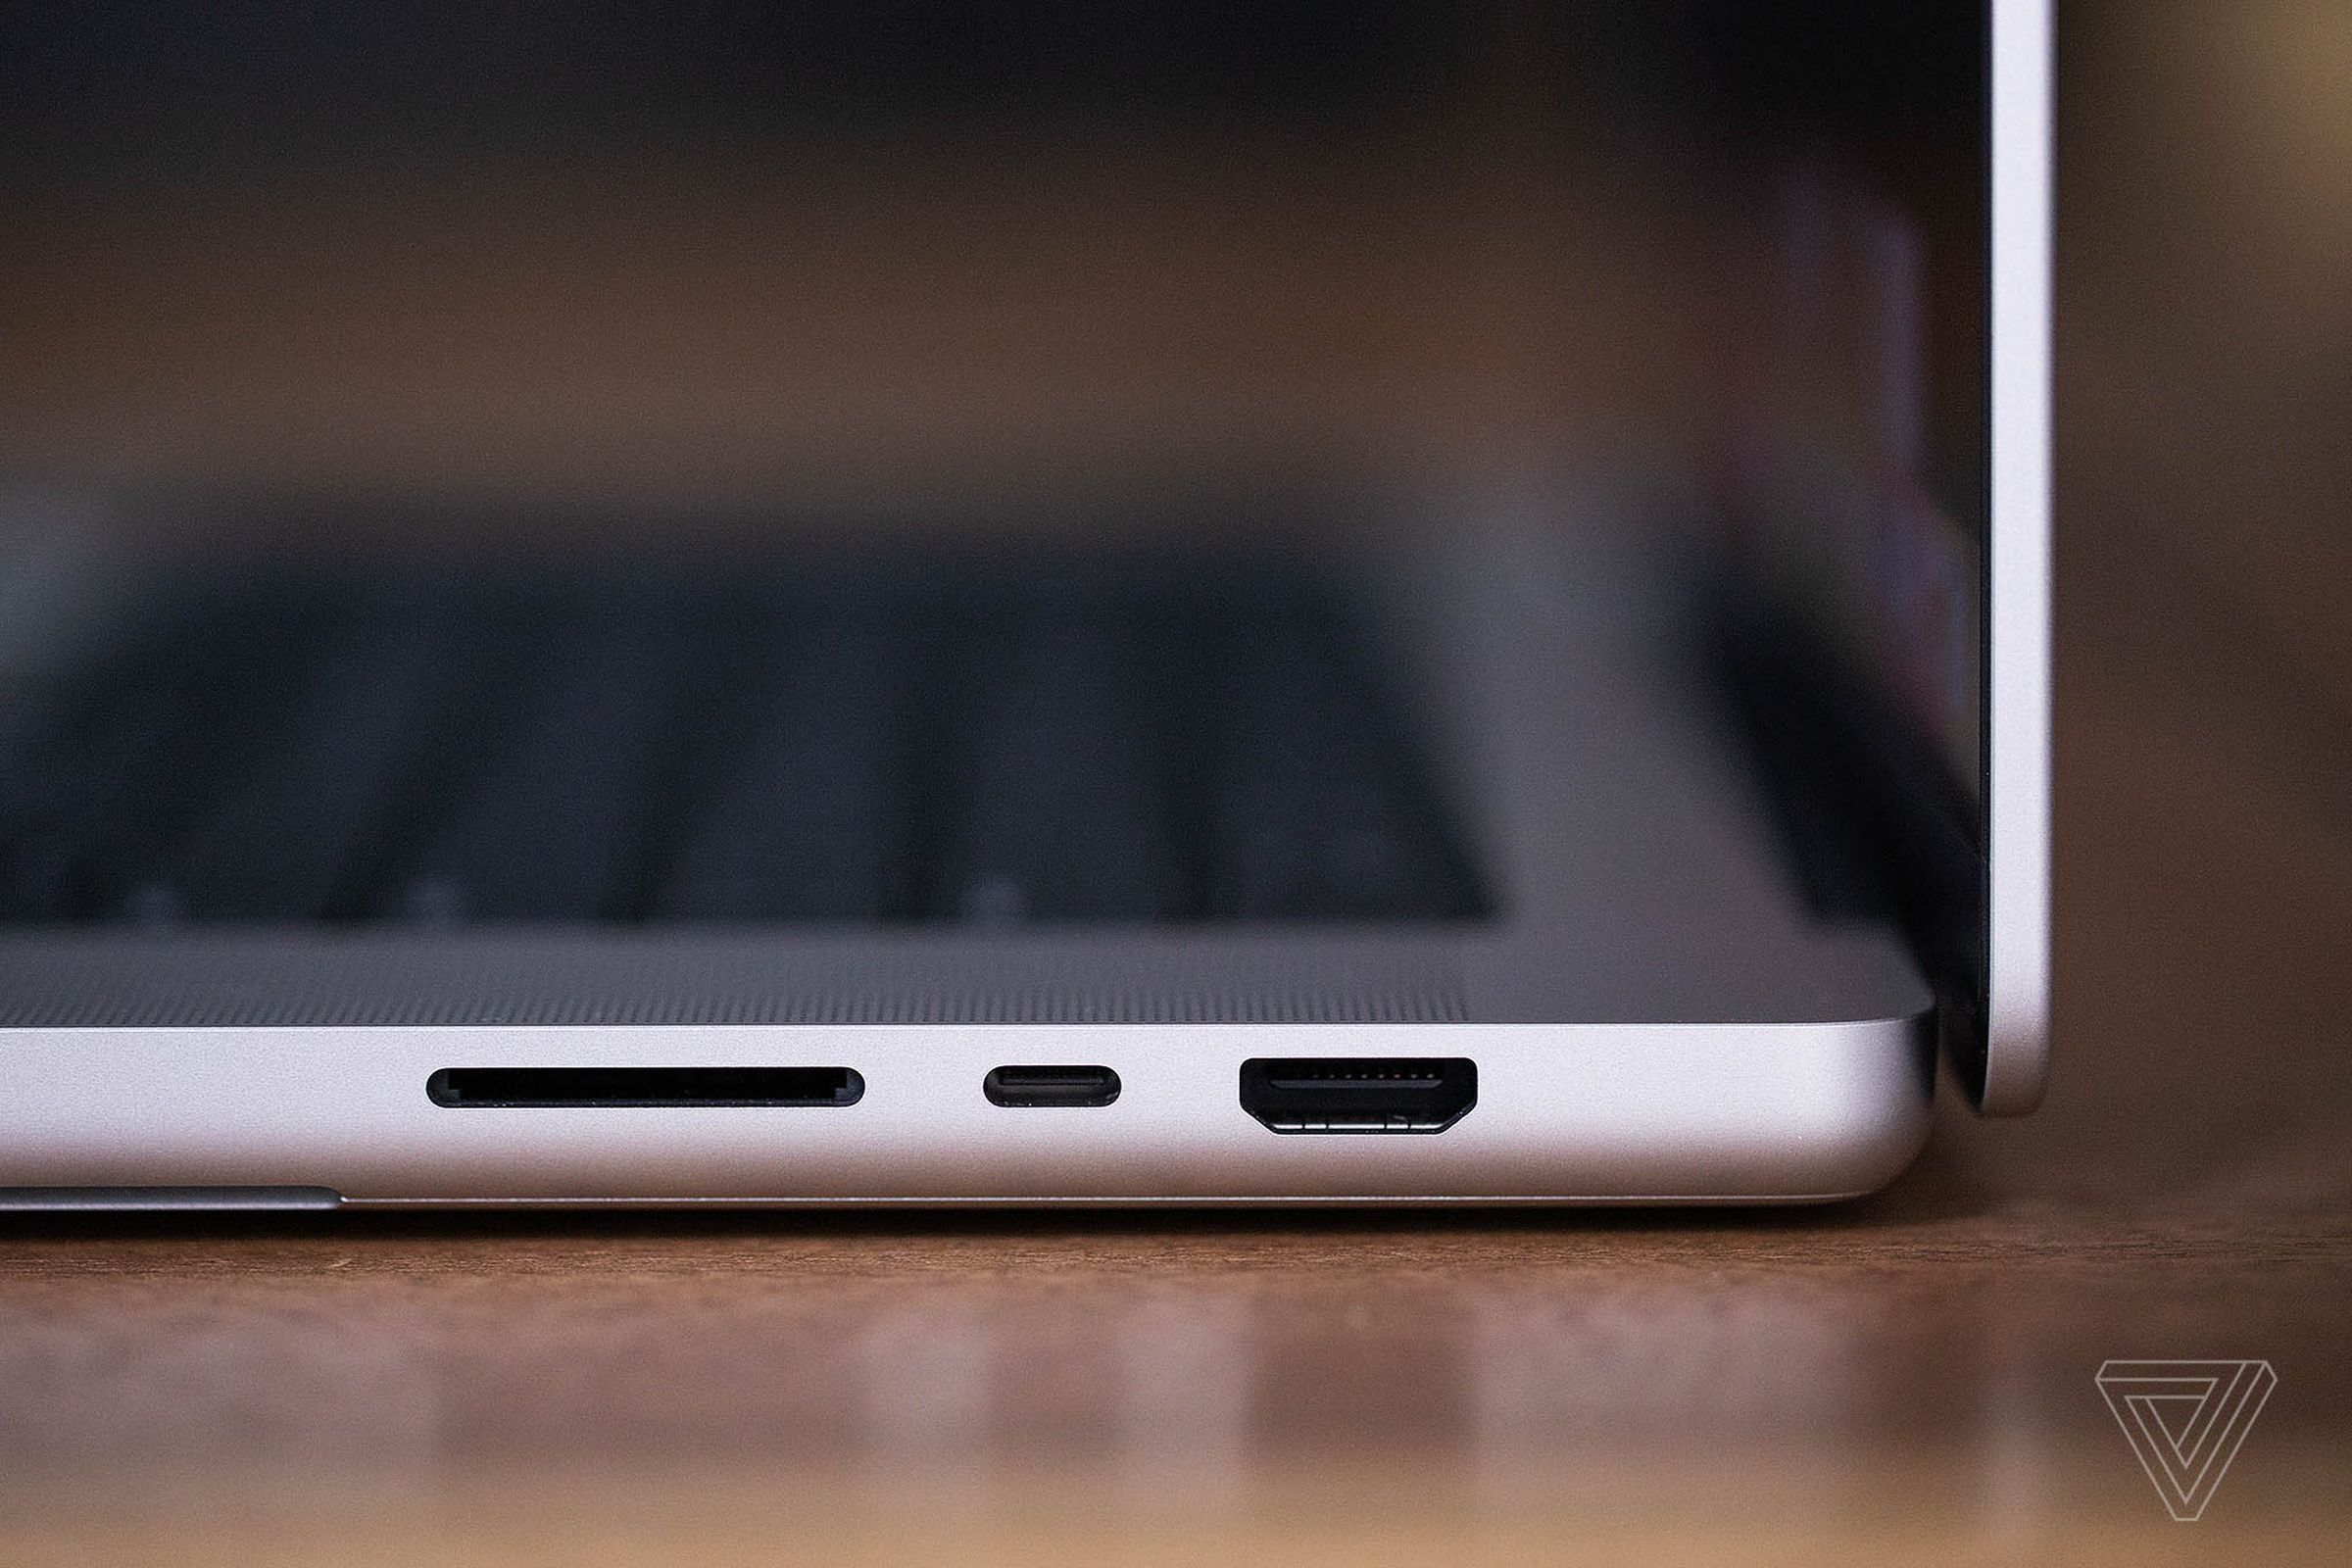 A side profile of the MacBook Pro 16 showing its full-size SD card slot, Thunderbolt 4 USB-C port, and HDMI port.